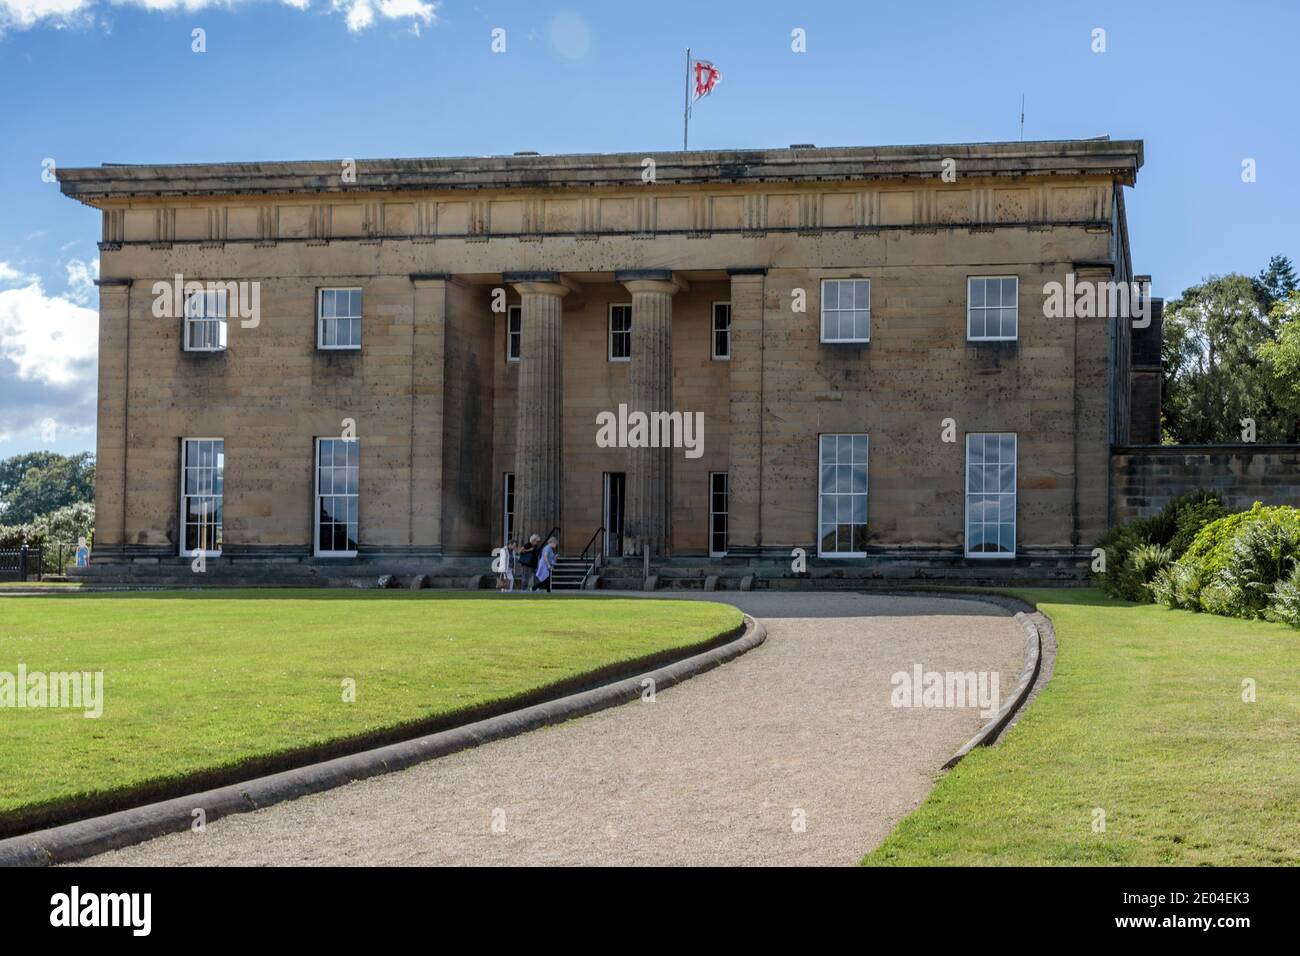 Portico d'ingresso a Belsay Hall, Northumberland, Inghilterra, Regno Unito Foto Stock